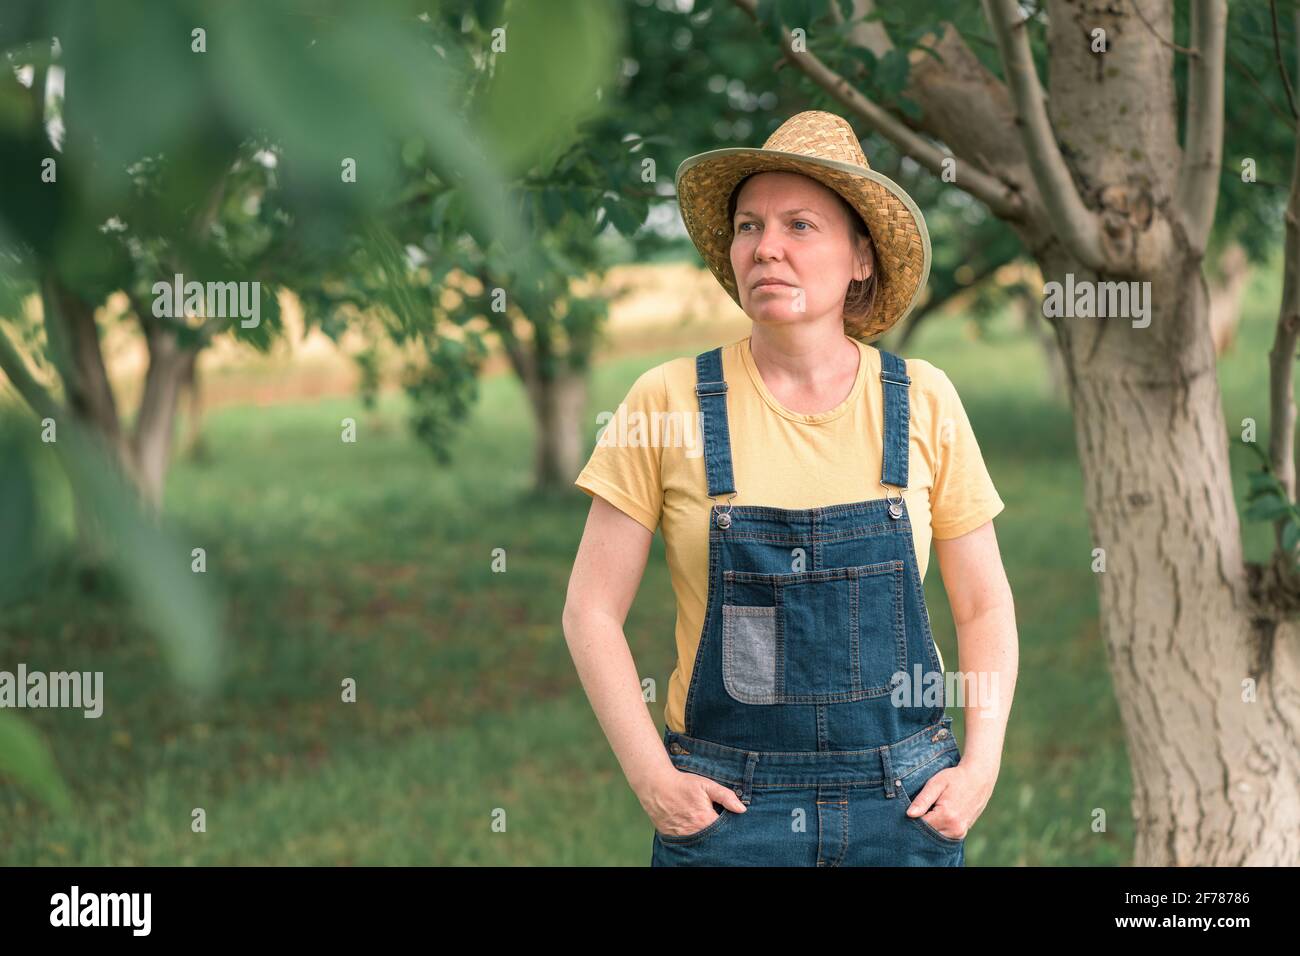 Portrait of female farmer posing in walnut fruit orchard, wearing straw hat and bib overalls Stock Photo